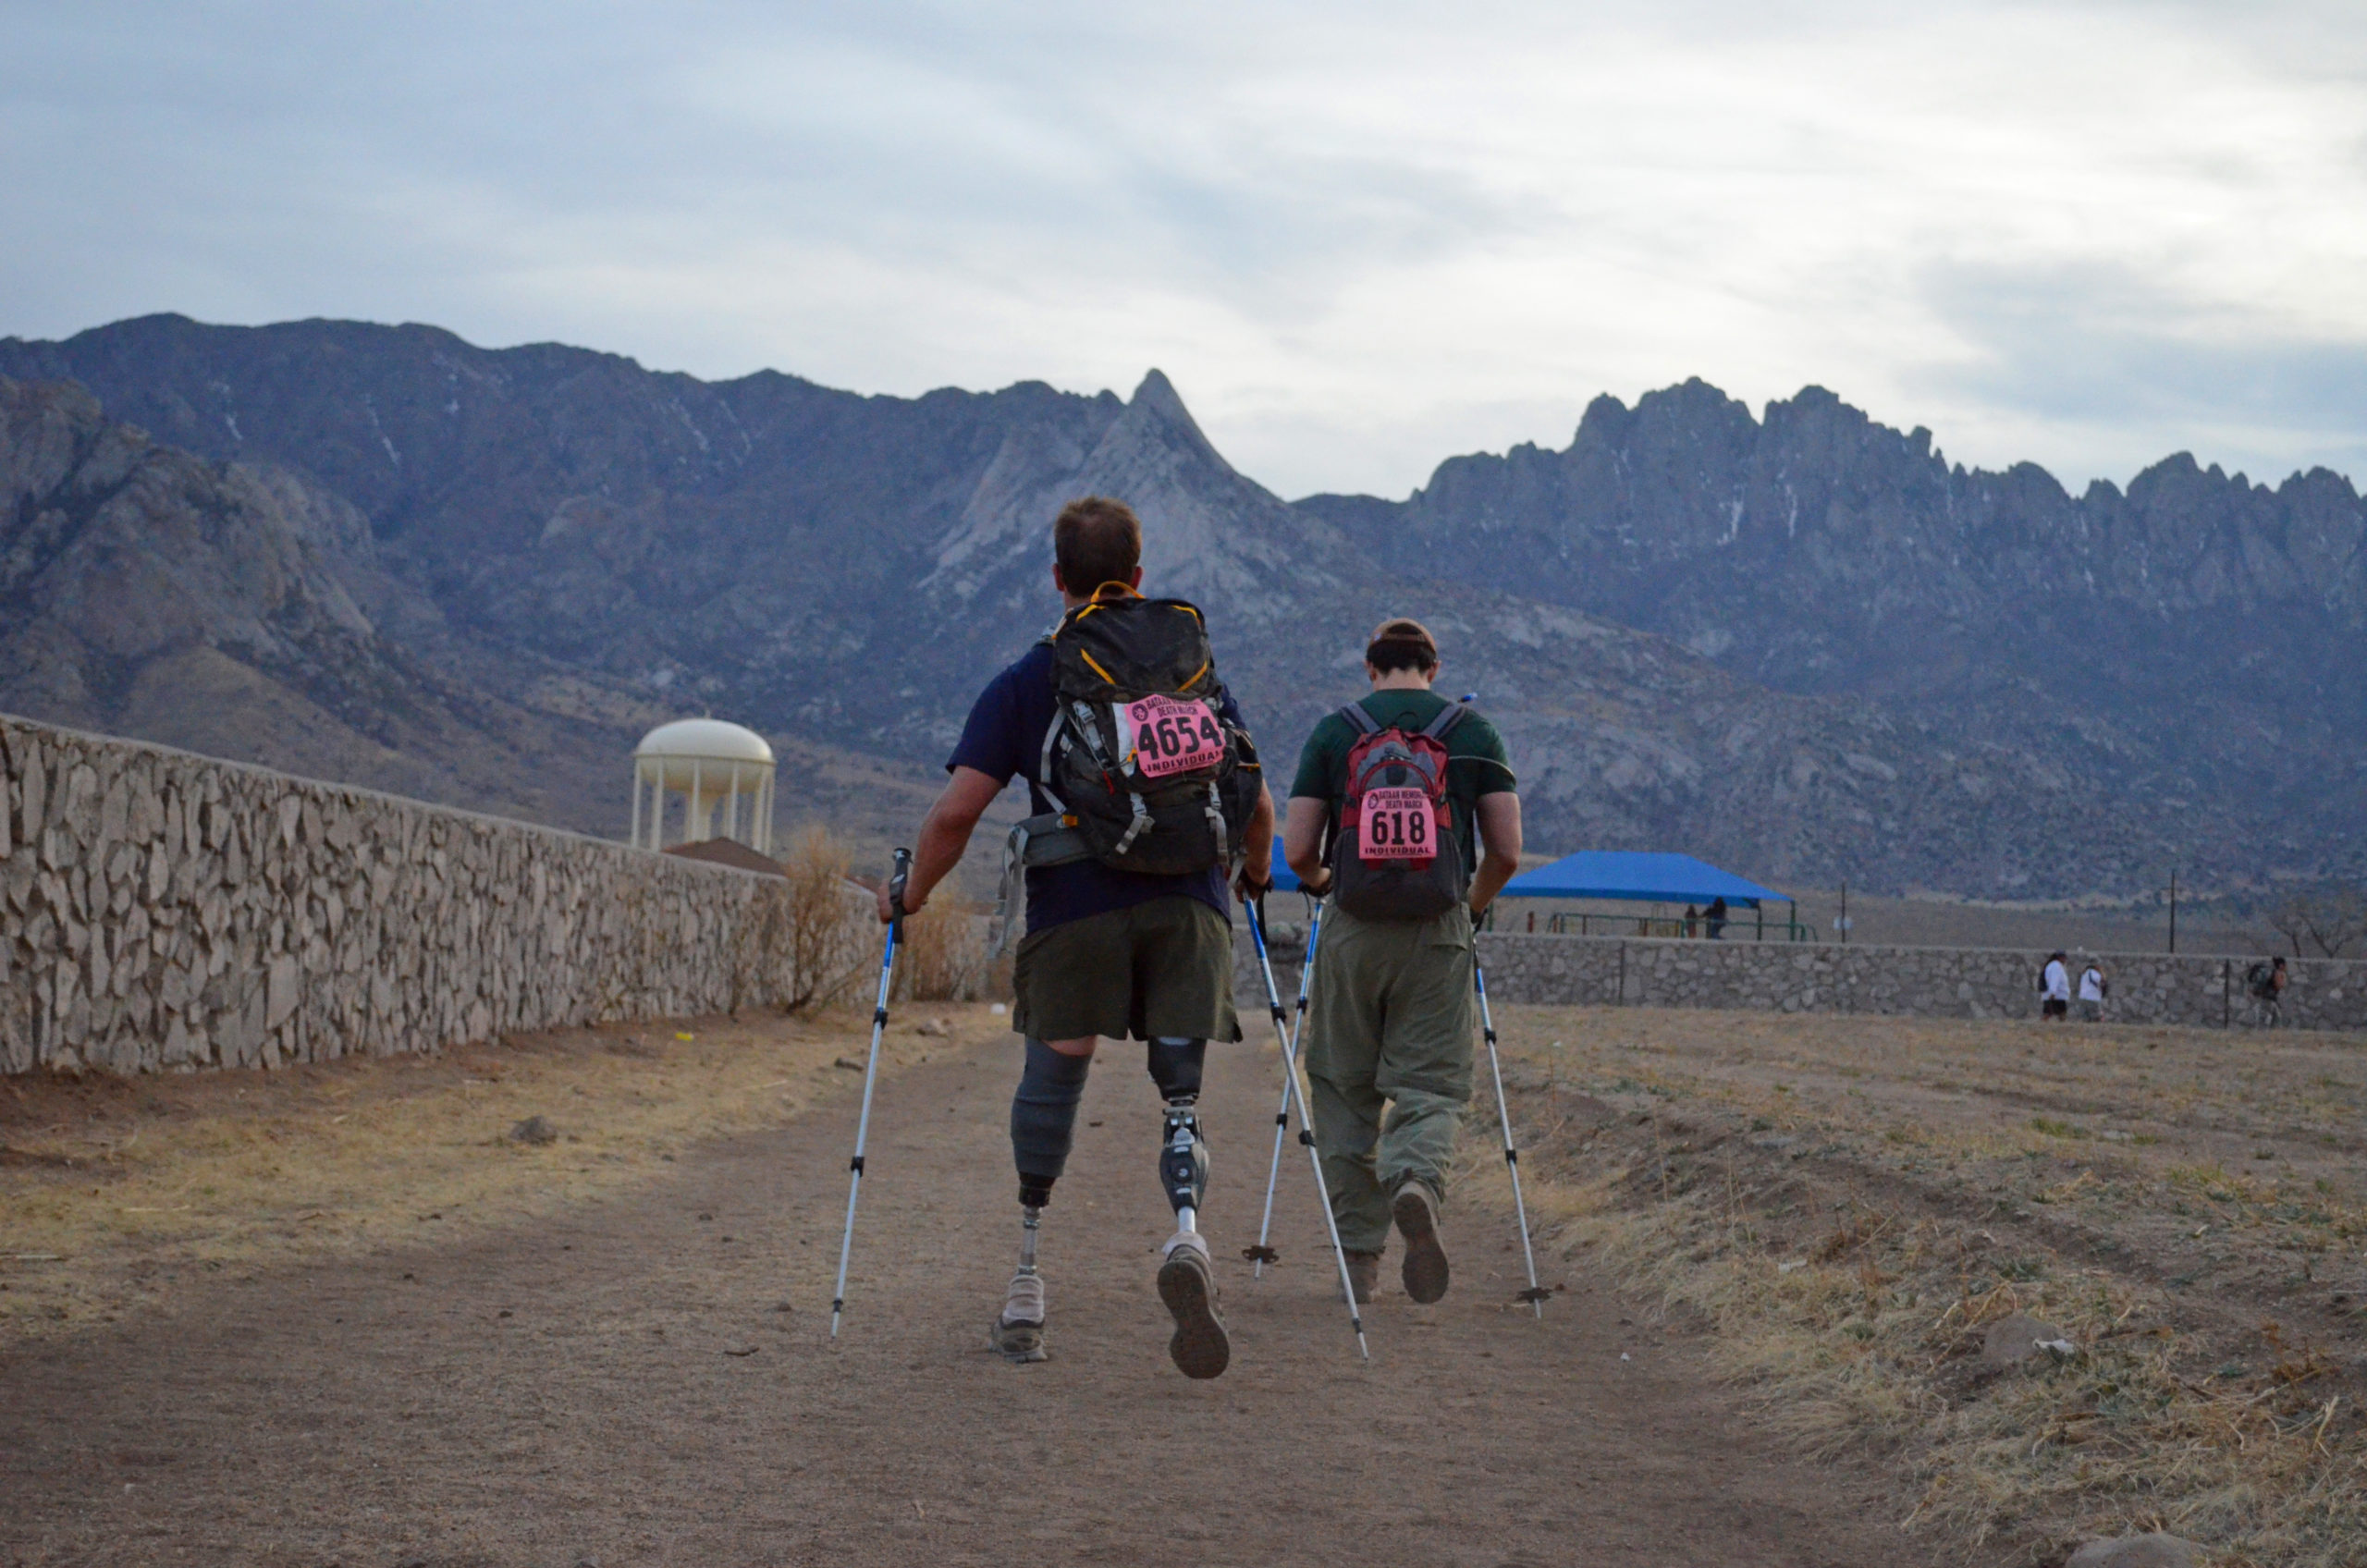 Two people hiking one with a double leg amputation with mountains in the background